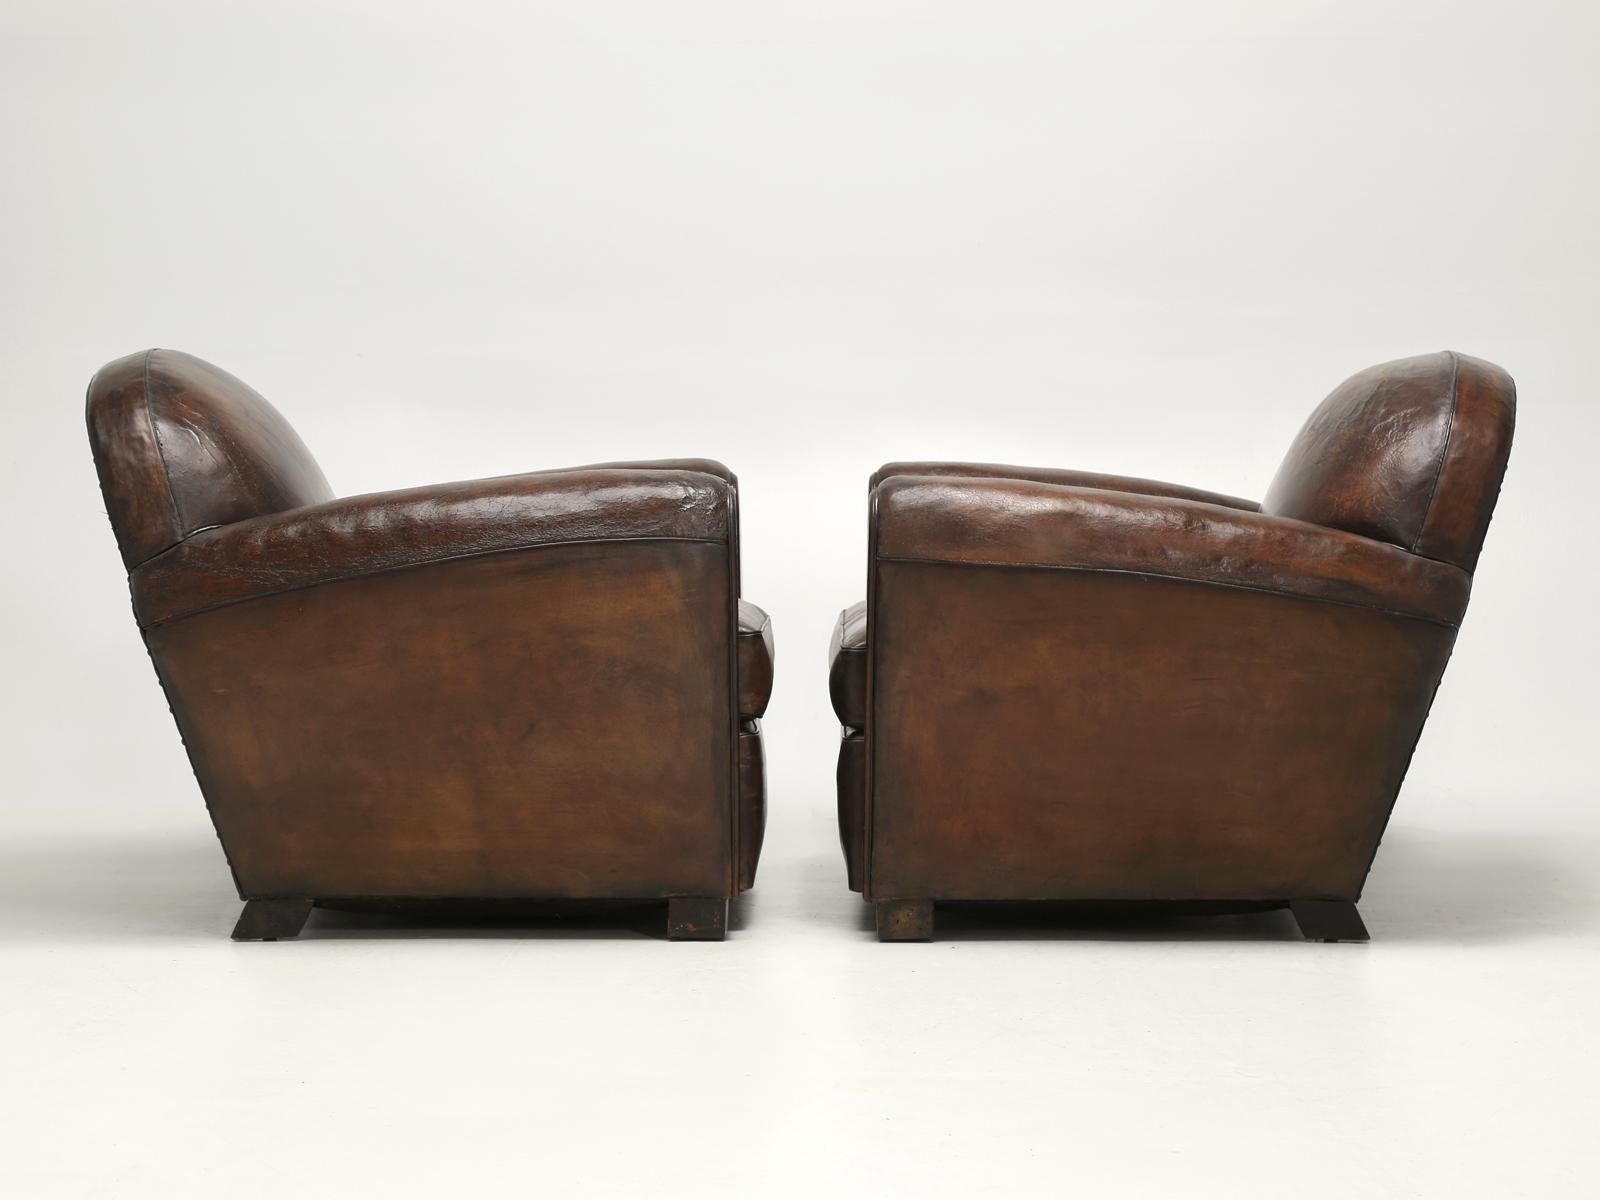 Old Plank has been specializing in the importation and restoration of French leather club chairs for over 30-years and we are still trying to improve our craft. These are a particularly early pair of French Art Deco club chairs, probably dating from